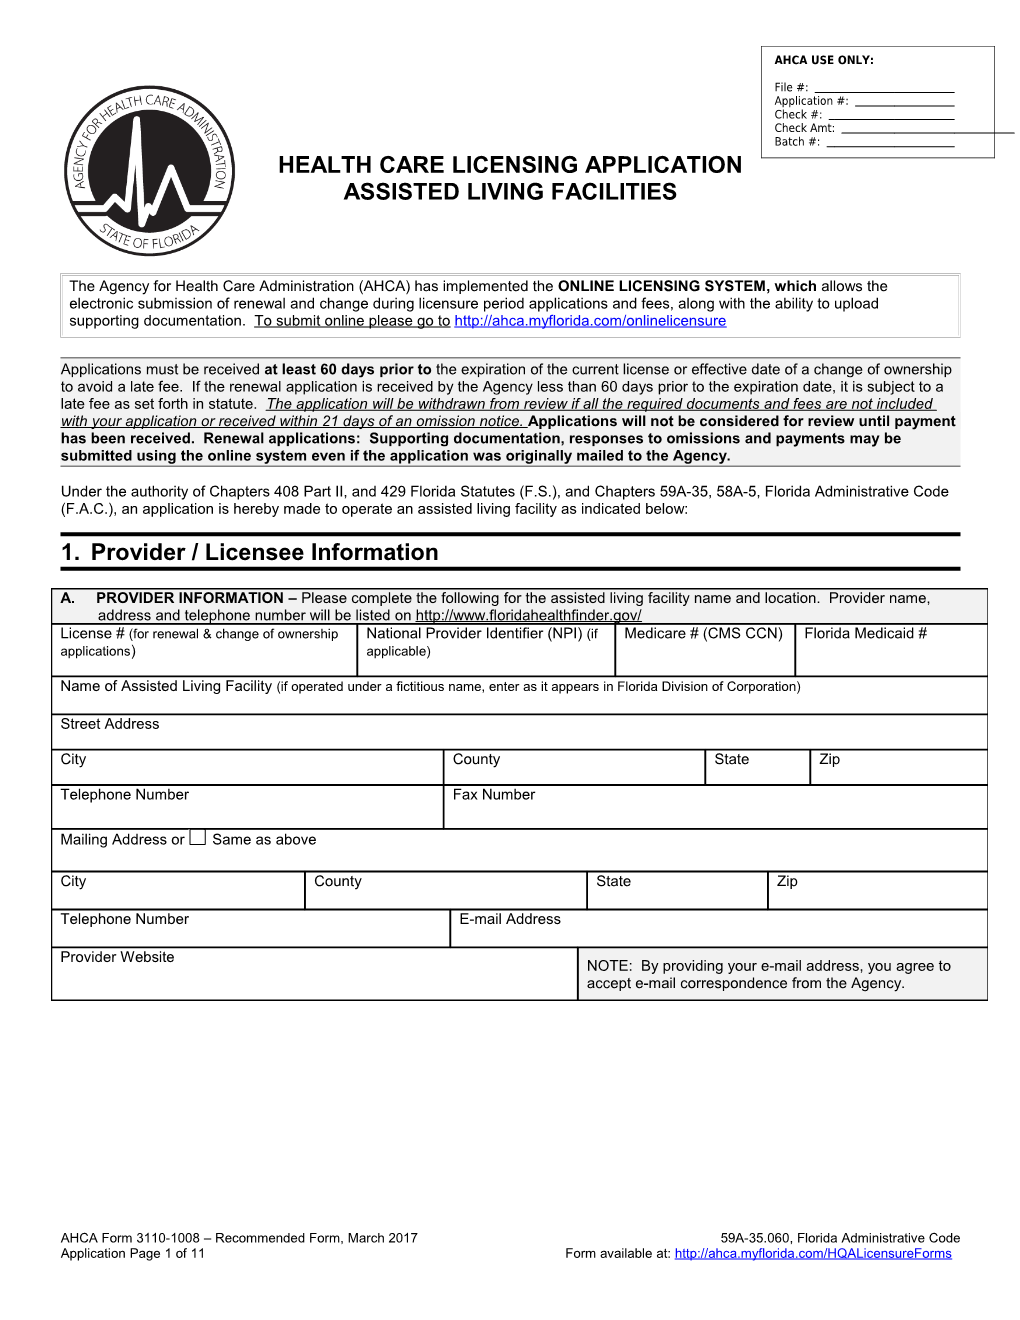 Health Care Licensing Application